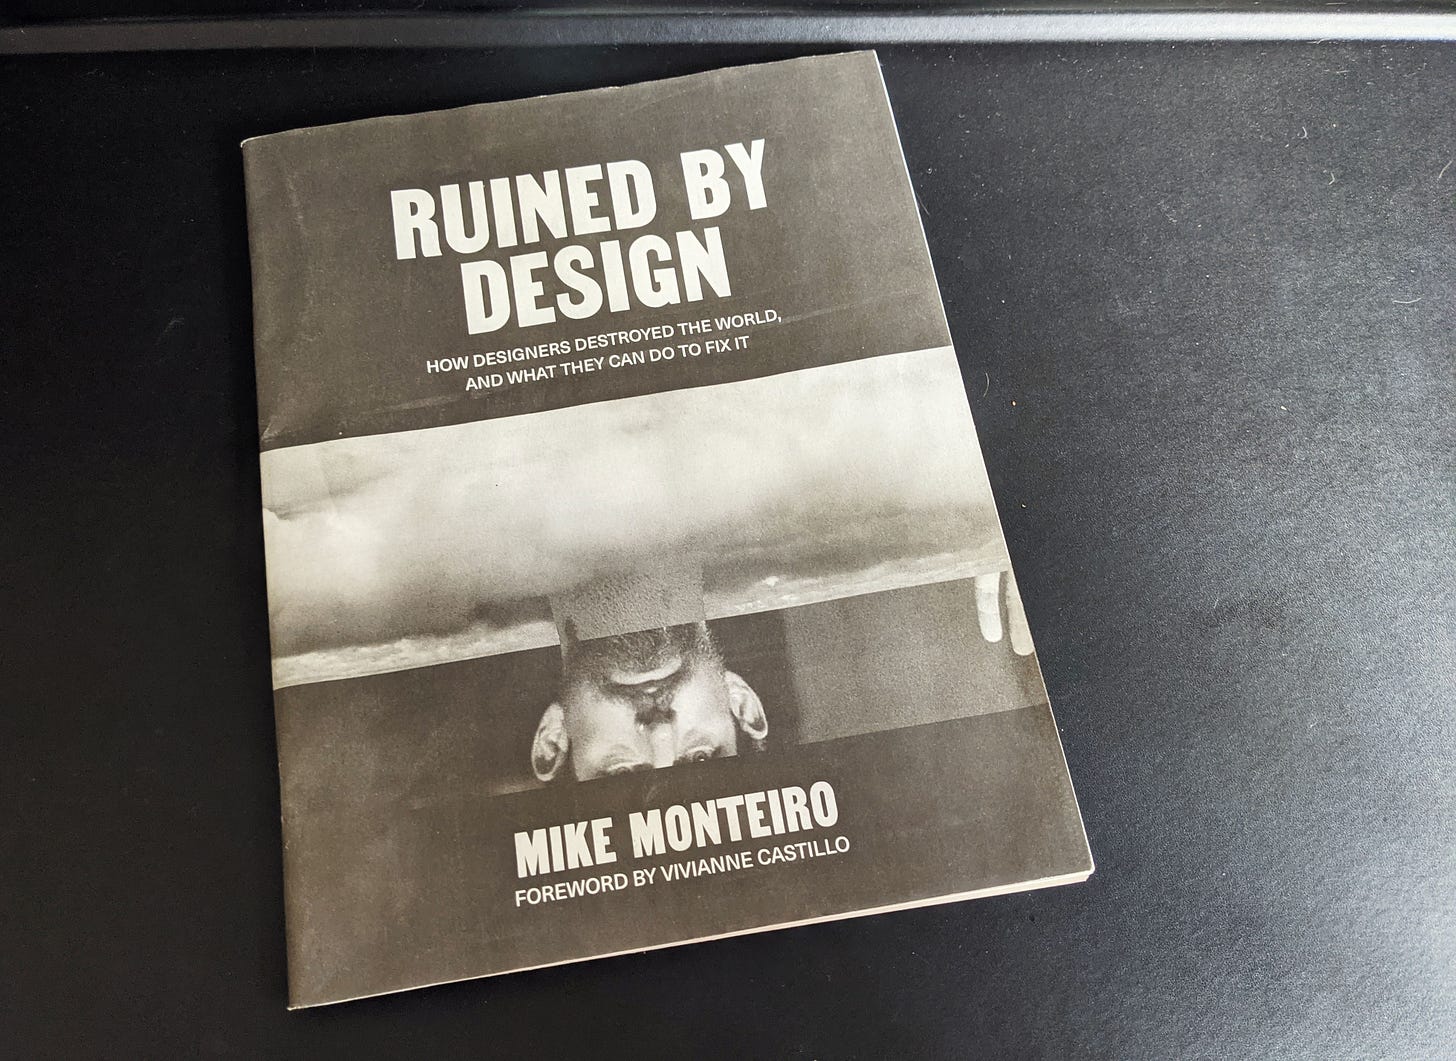 The Ruined by Design Book - the Dirty Punk Econo Zine version.